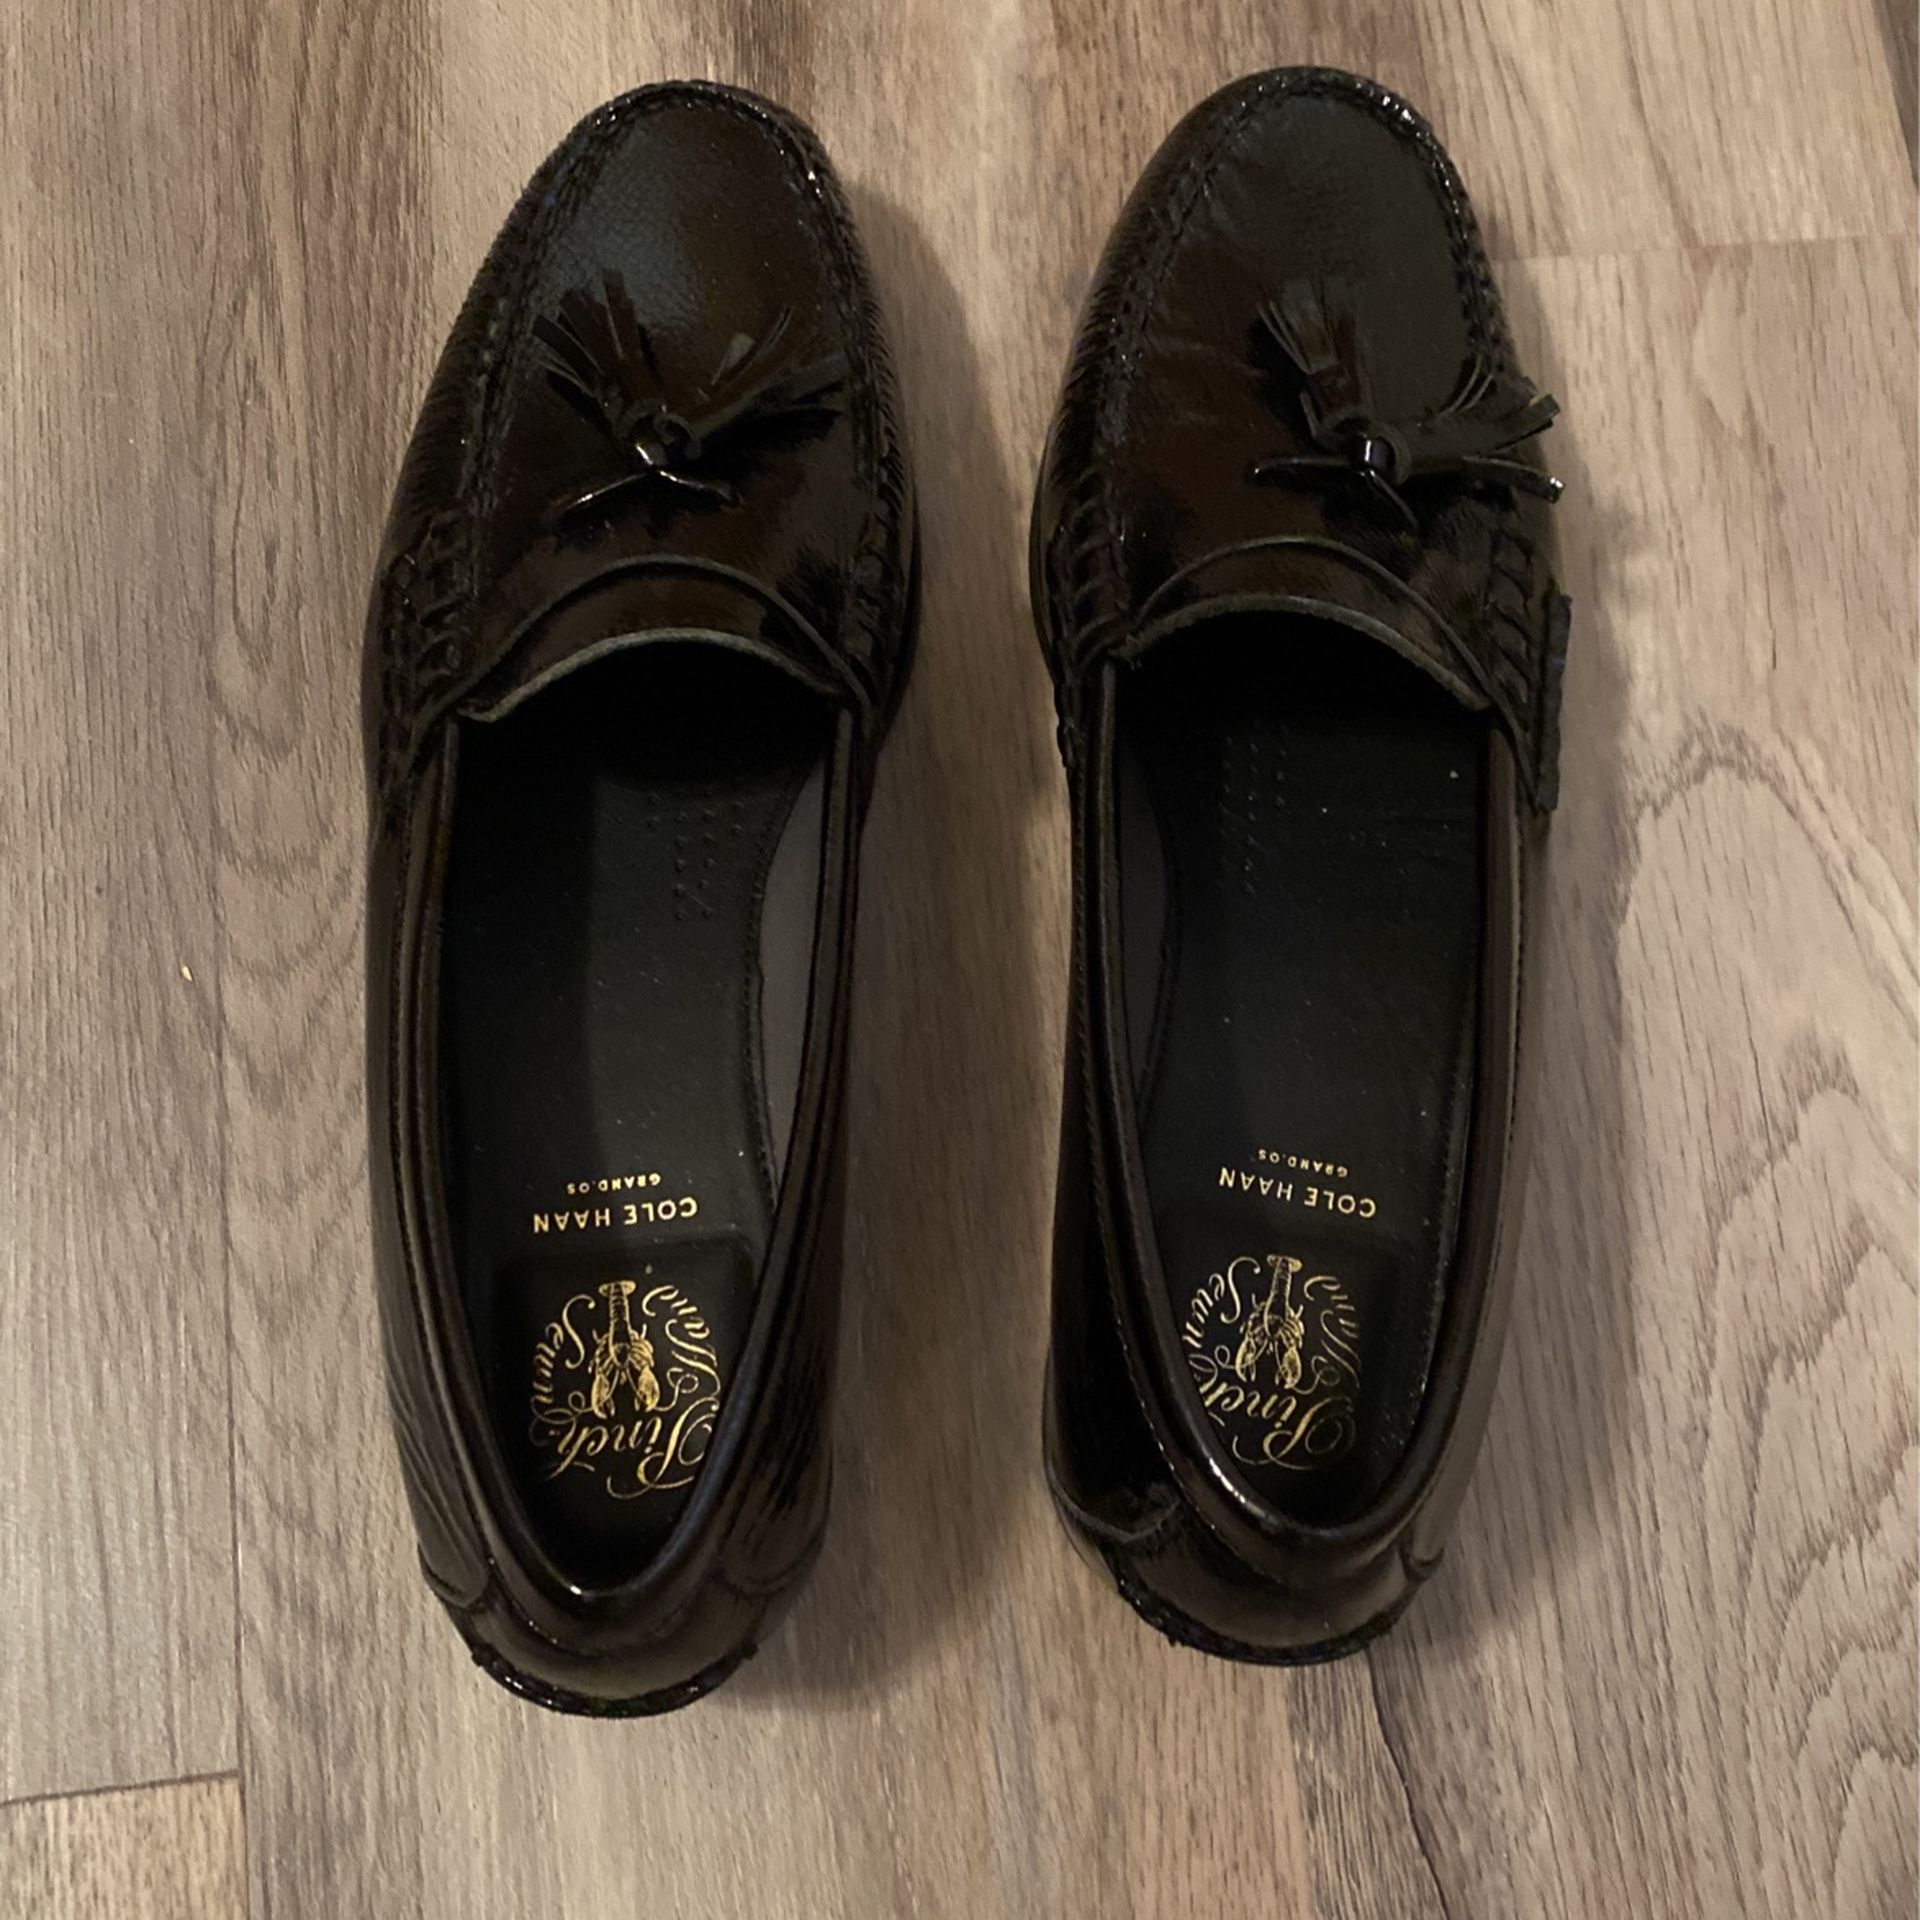 Patent Leather Cole Haan Tassel Loafers